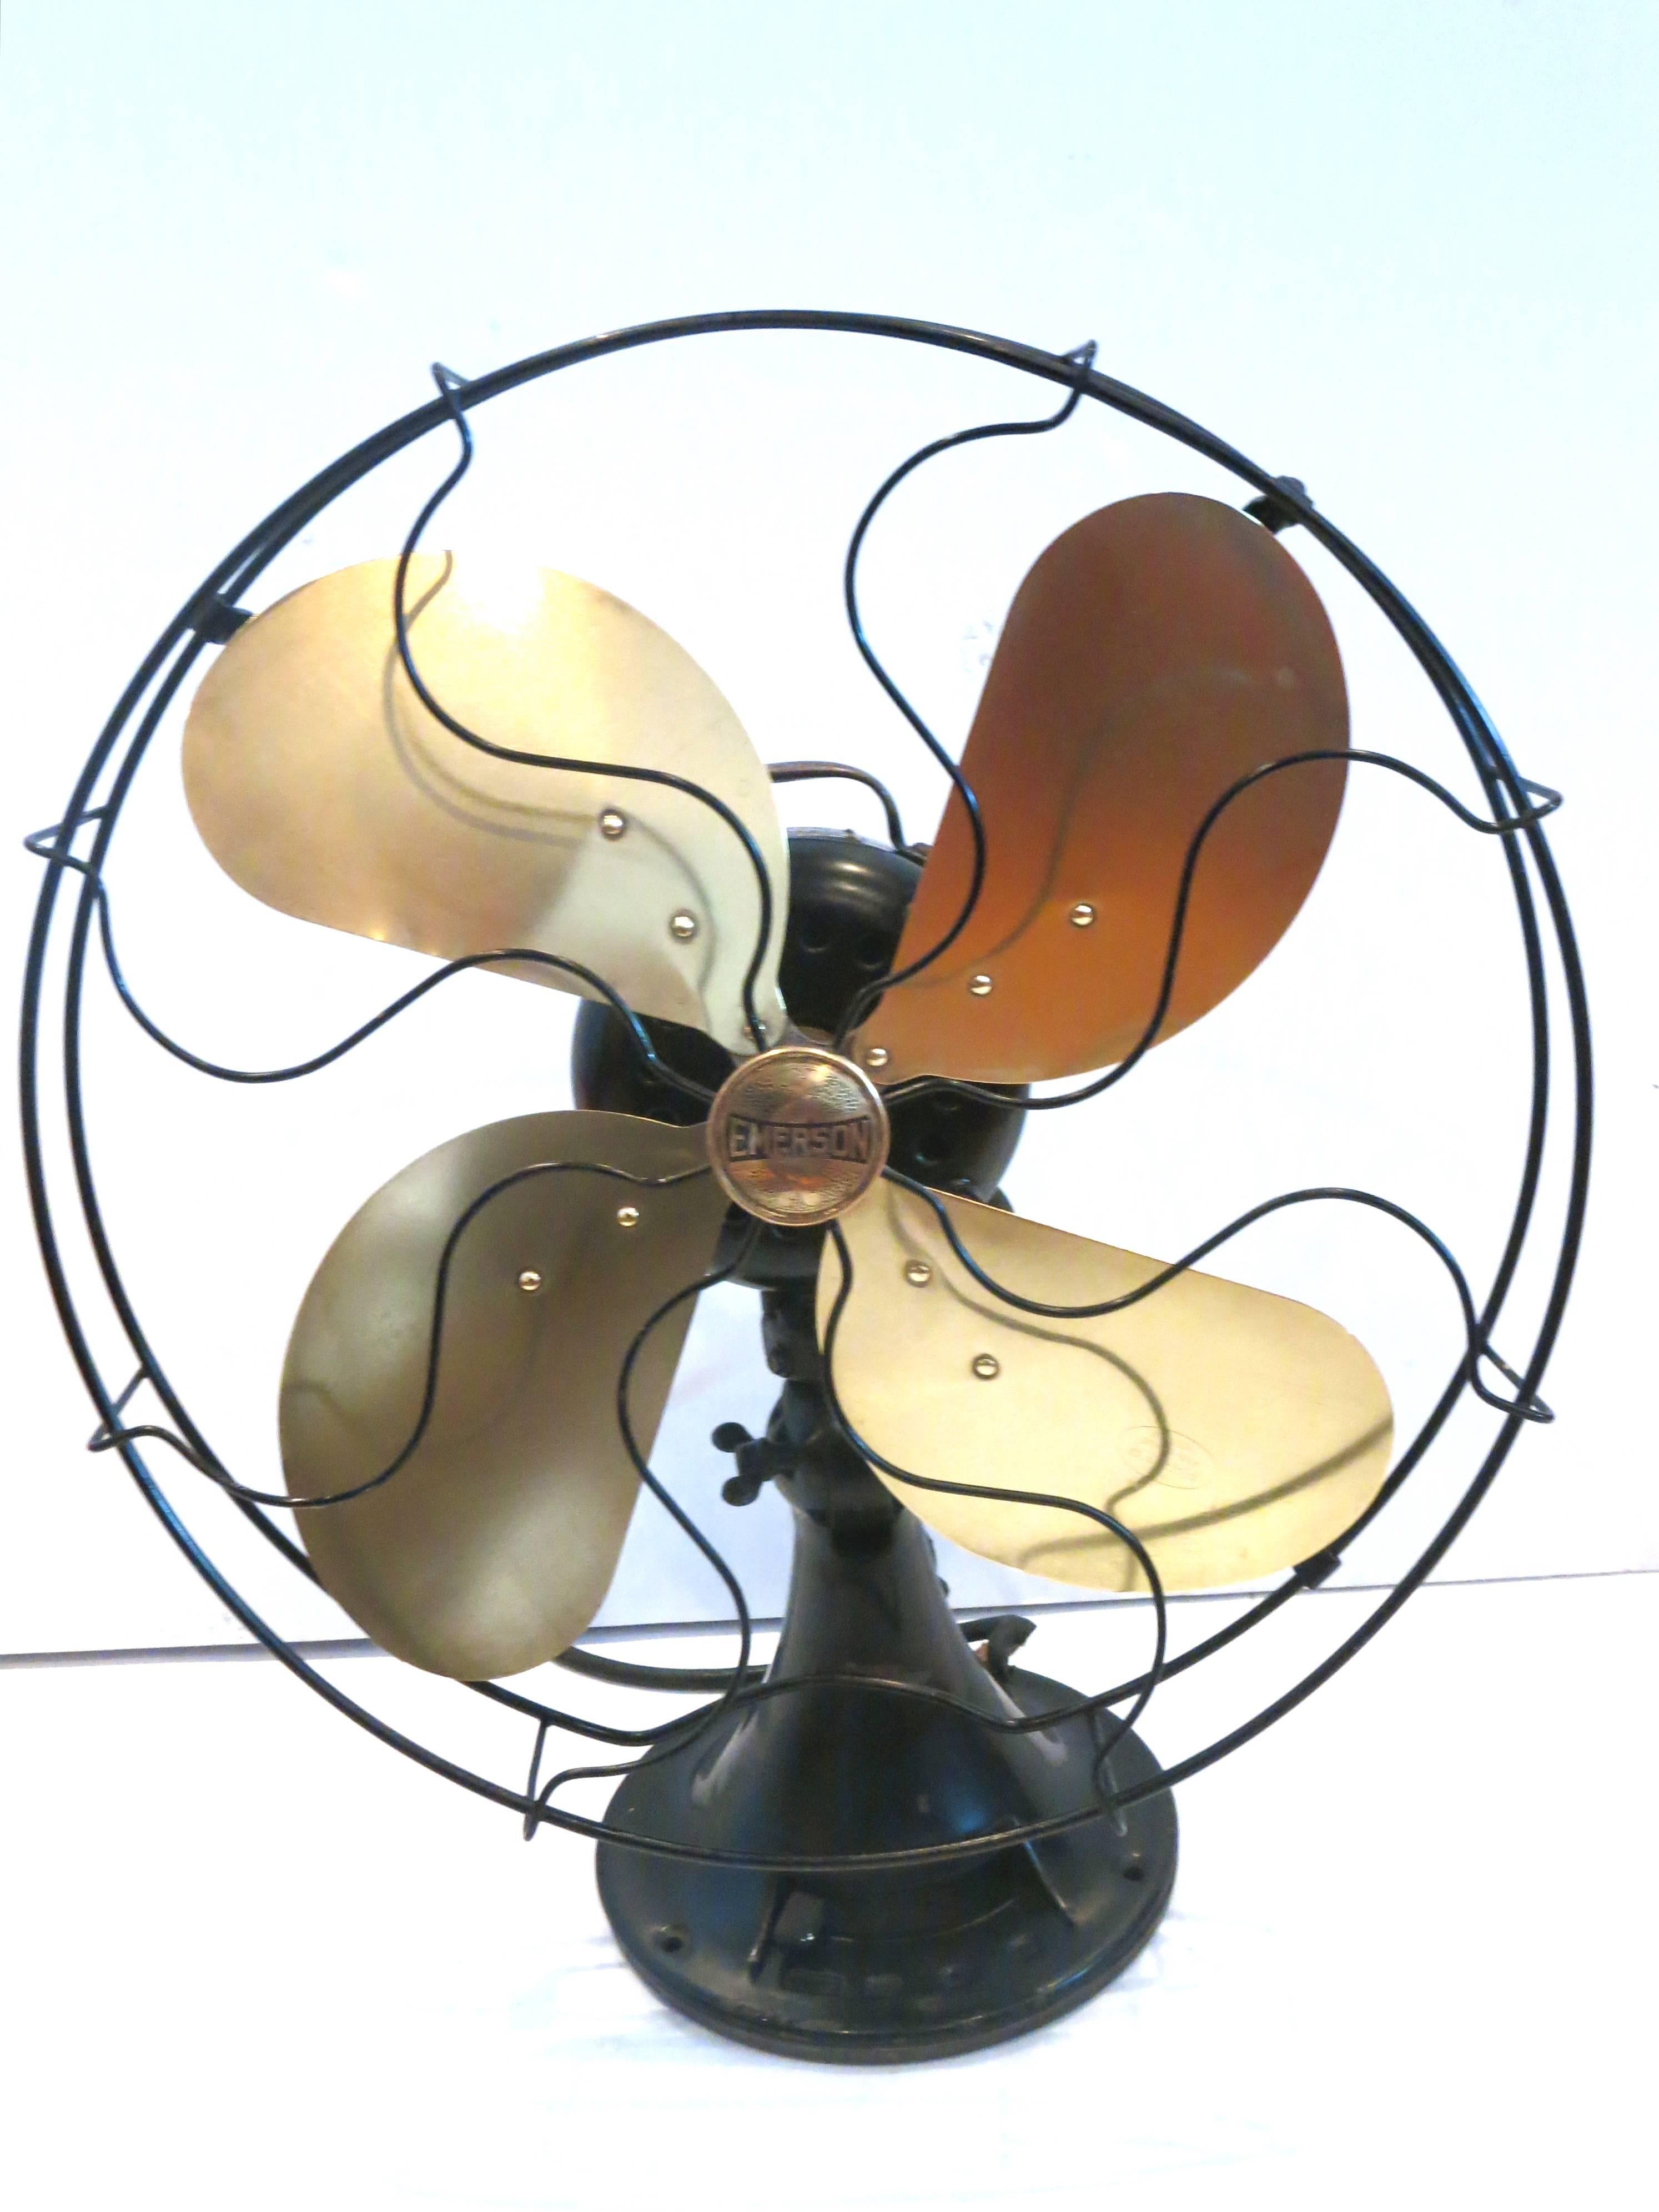 Mid-Century Modern 1940s Antique Large Ocillator Fan by Emerson Solid Polished Brass Blades